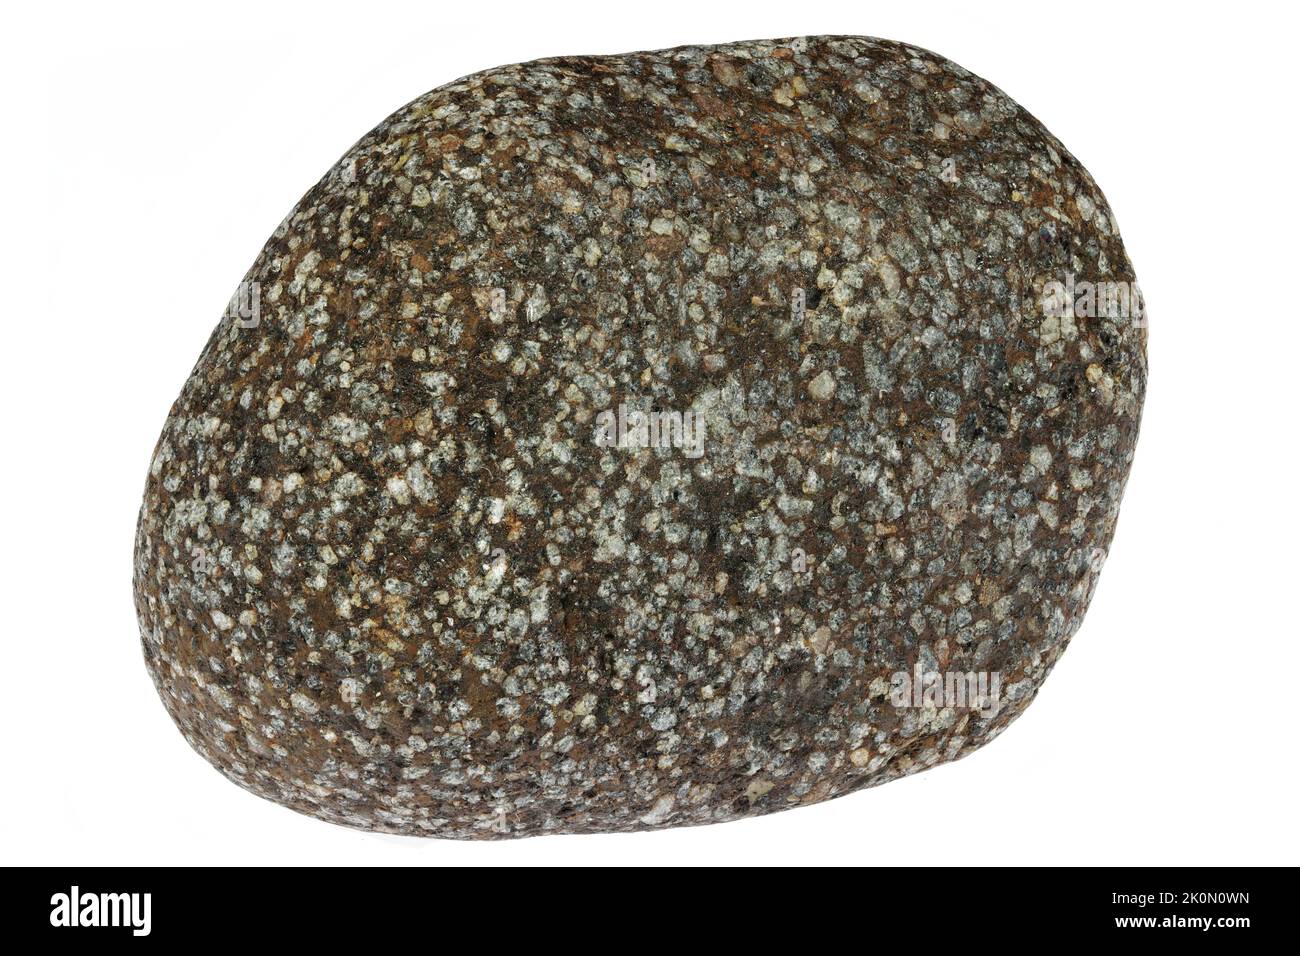 porphyry from the Baltic Sea coast in Waabs, Germany isolated on white background Stock Photo